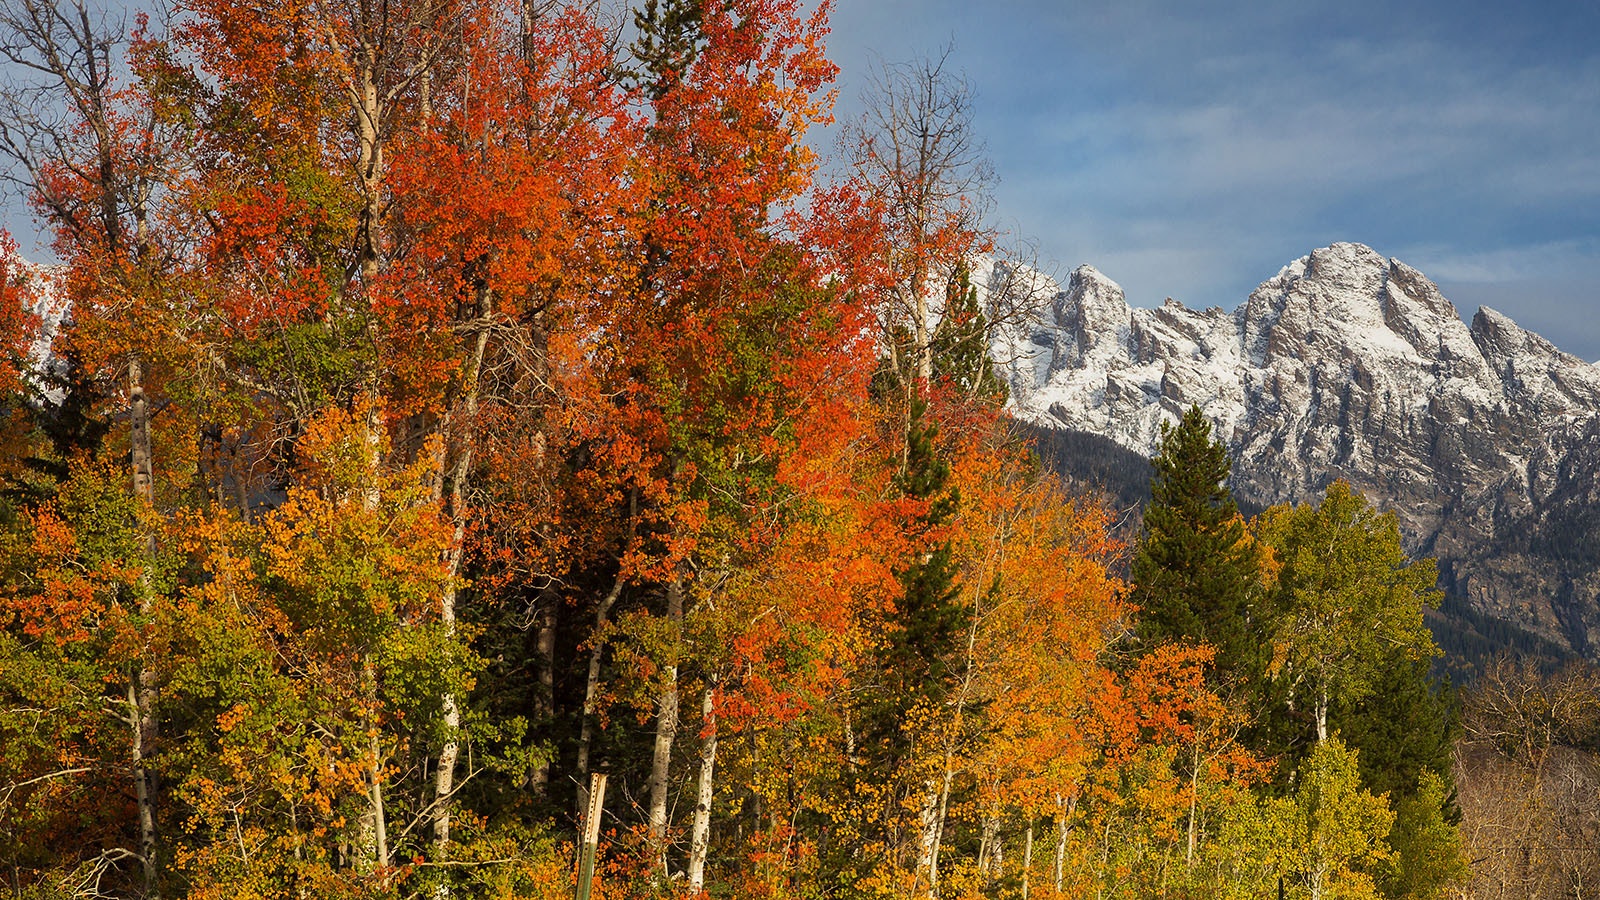 Deep red, gold and orange aspens turn as snow dusts the tops of the Tetons near Yellowstone National Park.